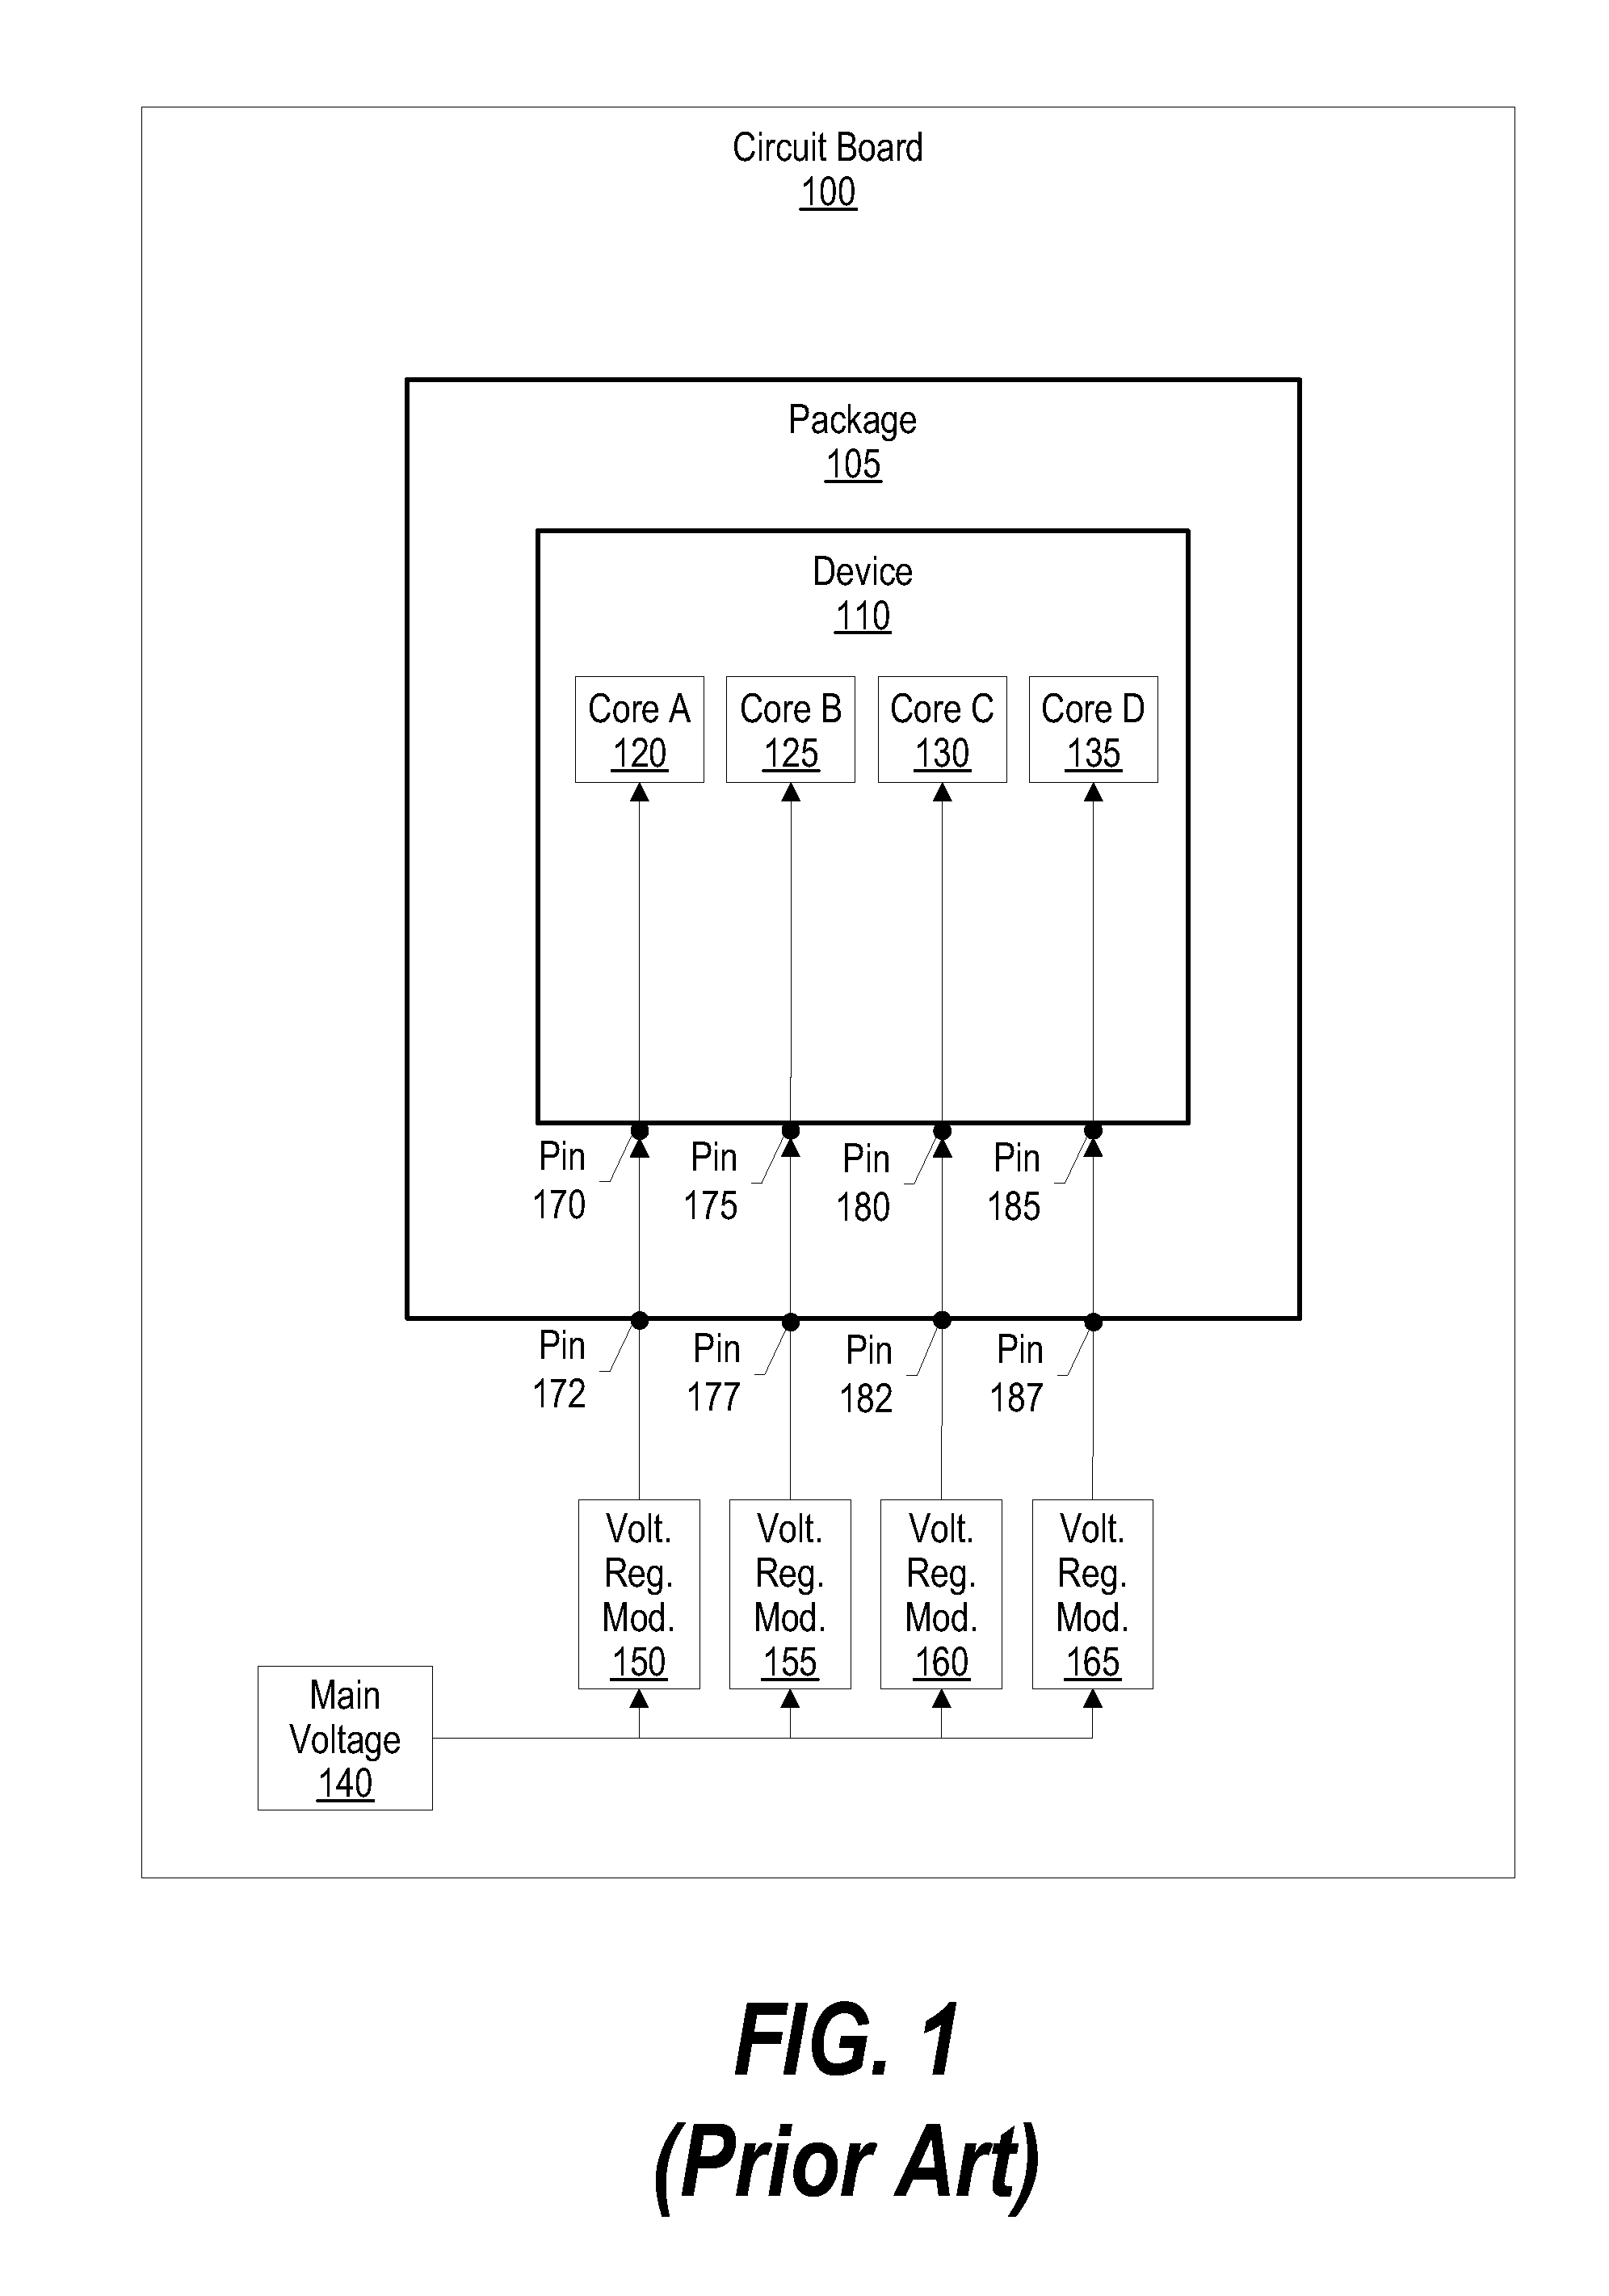 System and Method to Optimize Multi-Core Microprocessor Performance Using Voltage Offsets